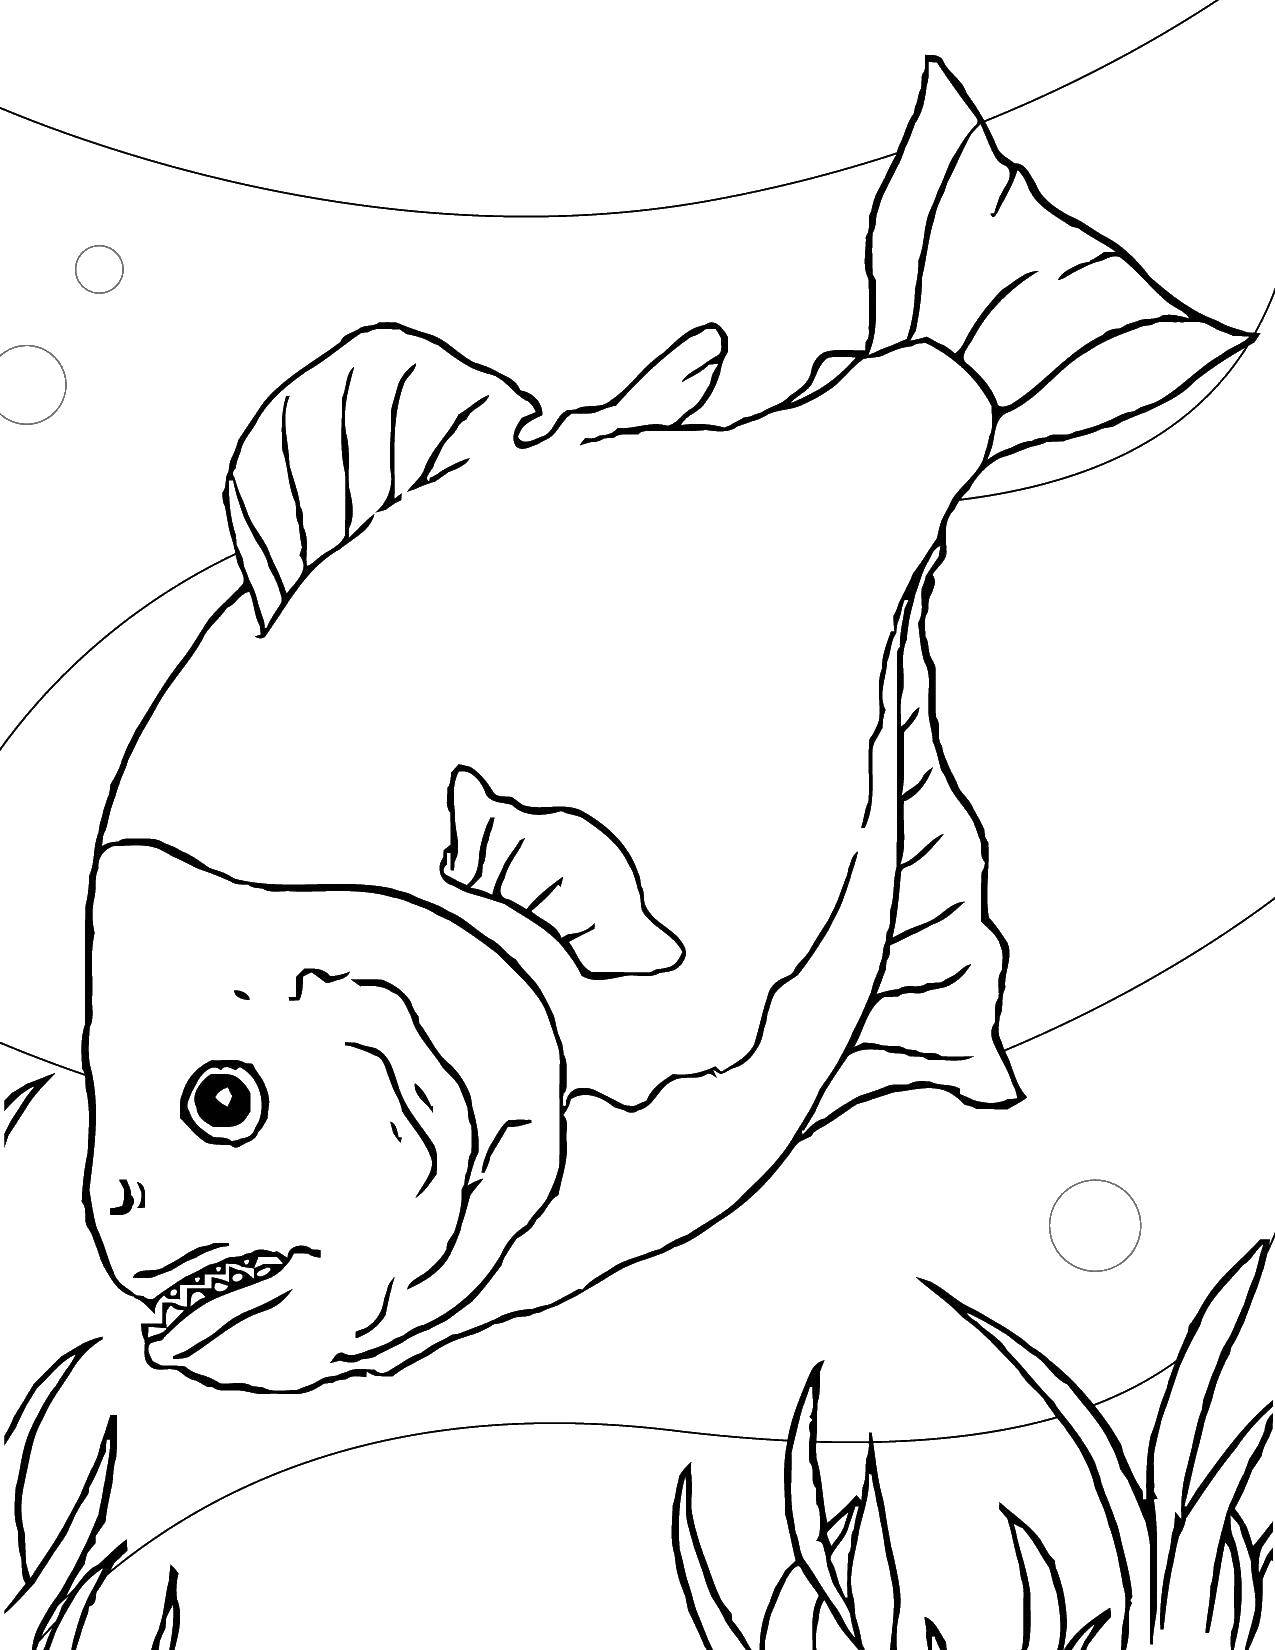 Coloring Bloodthirsty piranha. Category coloring. Tags:  Underwater world, fish.